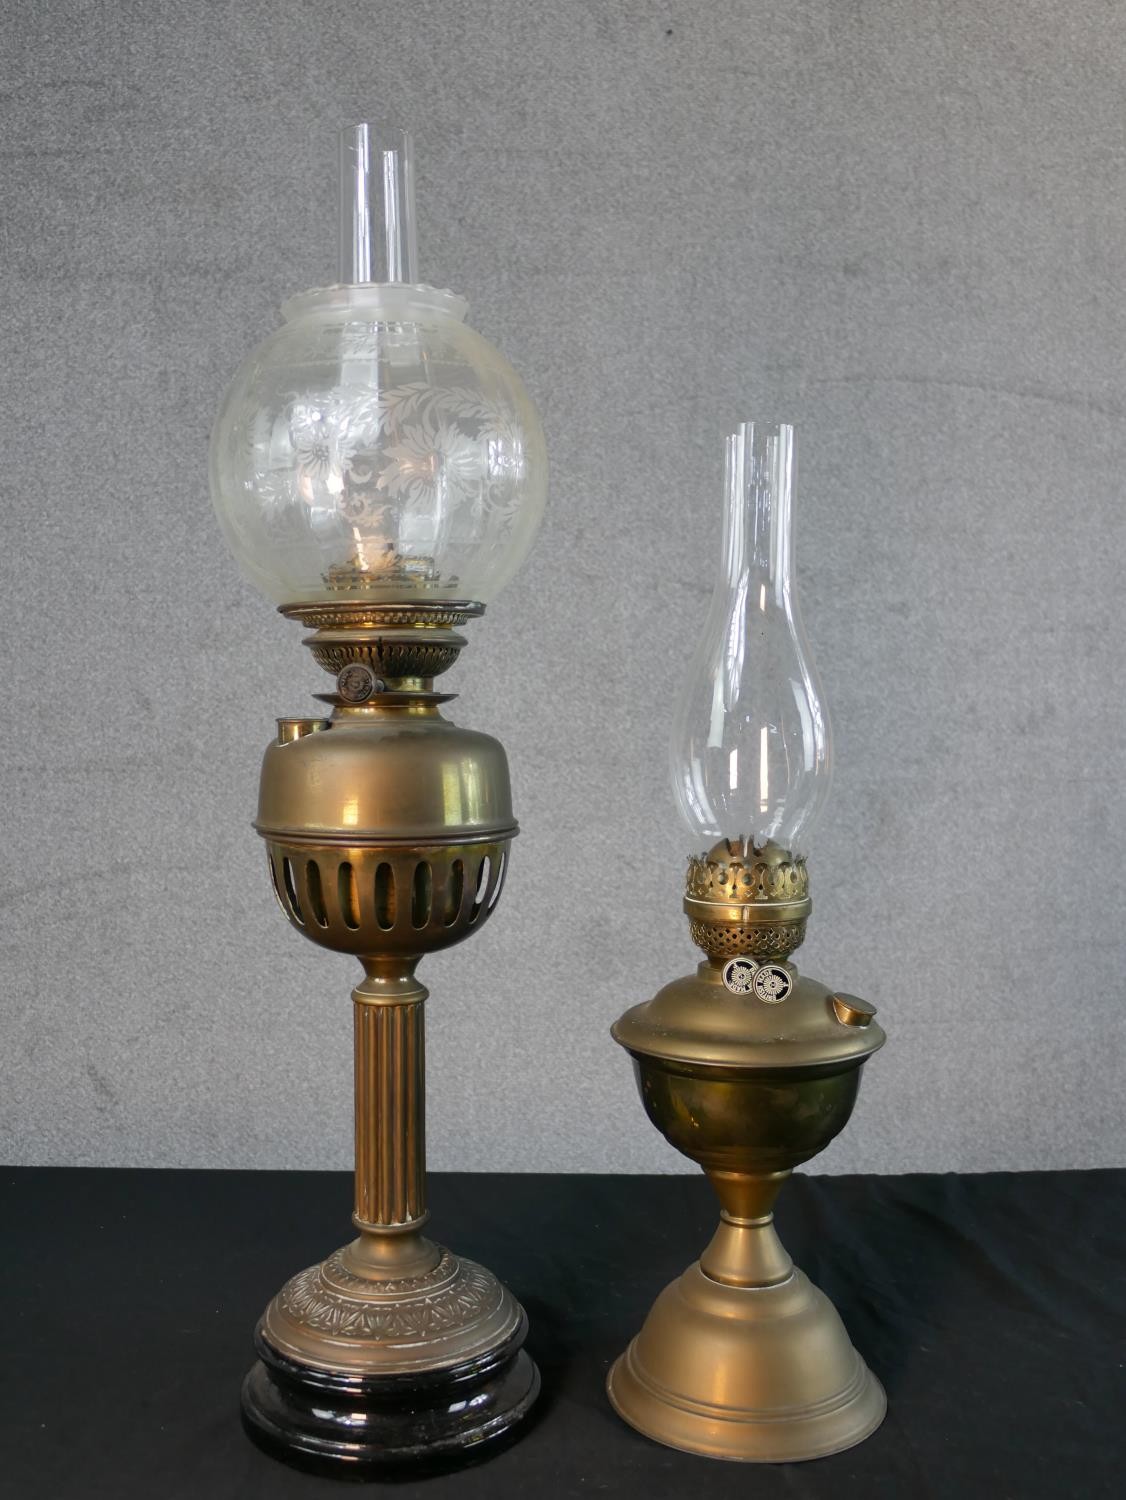 Three Victorian brass oil lamps, one with a spherical etched glass shade and a glass funnel, on an